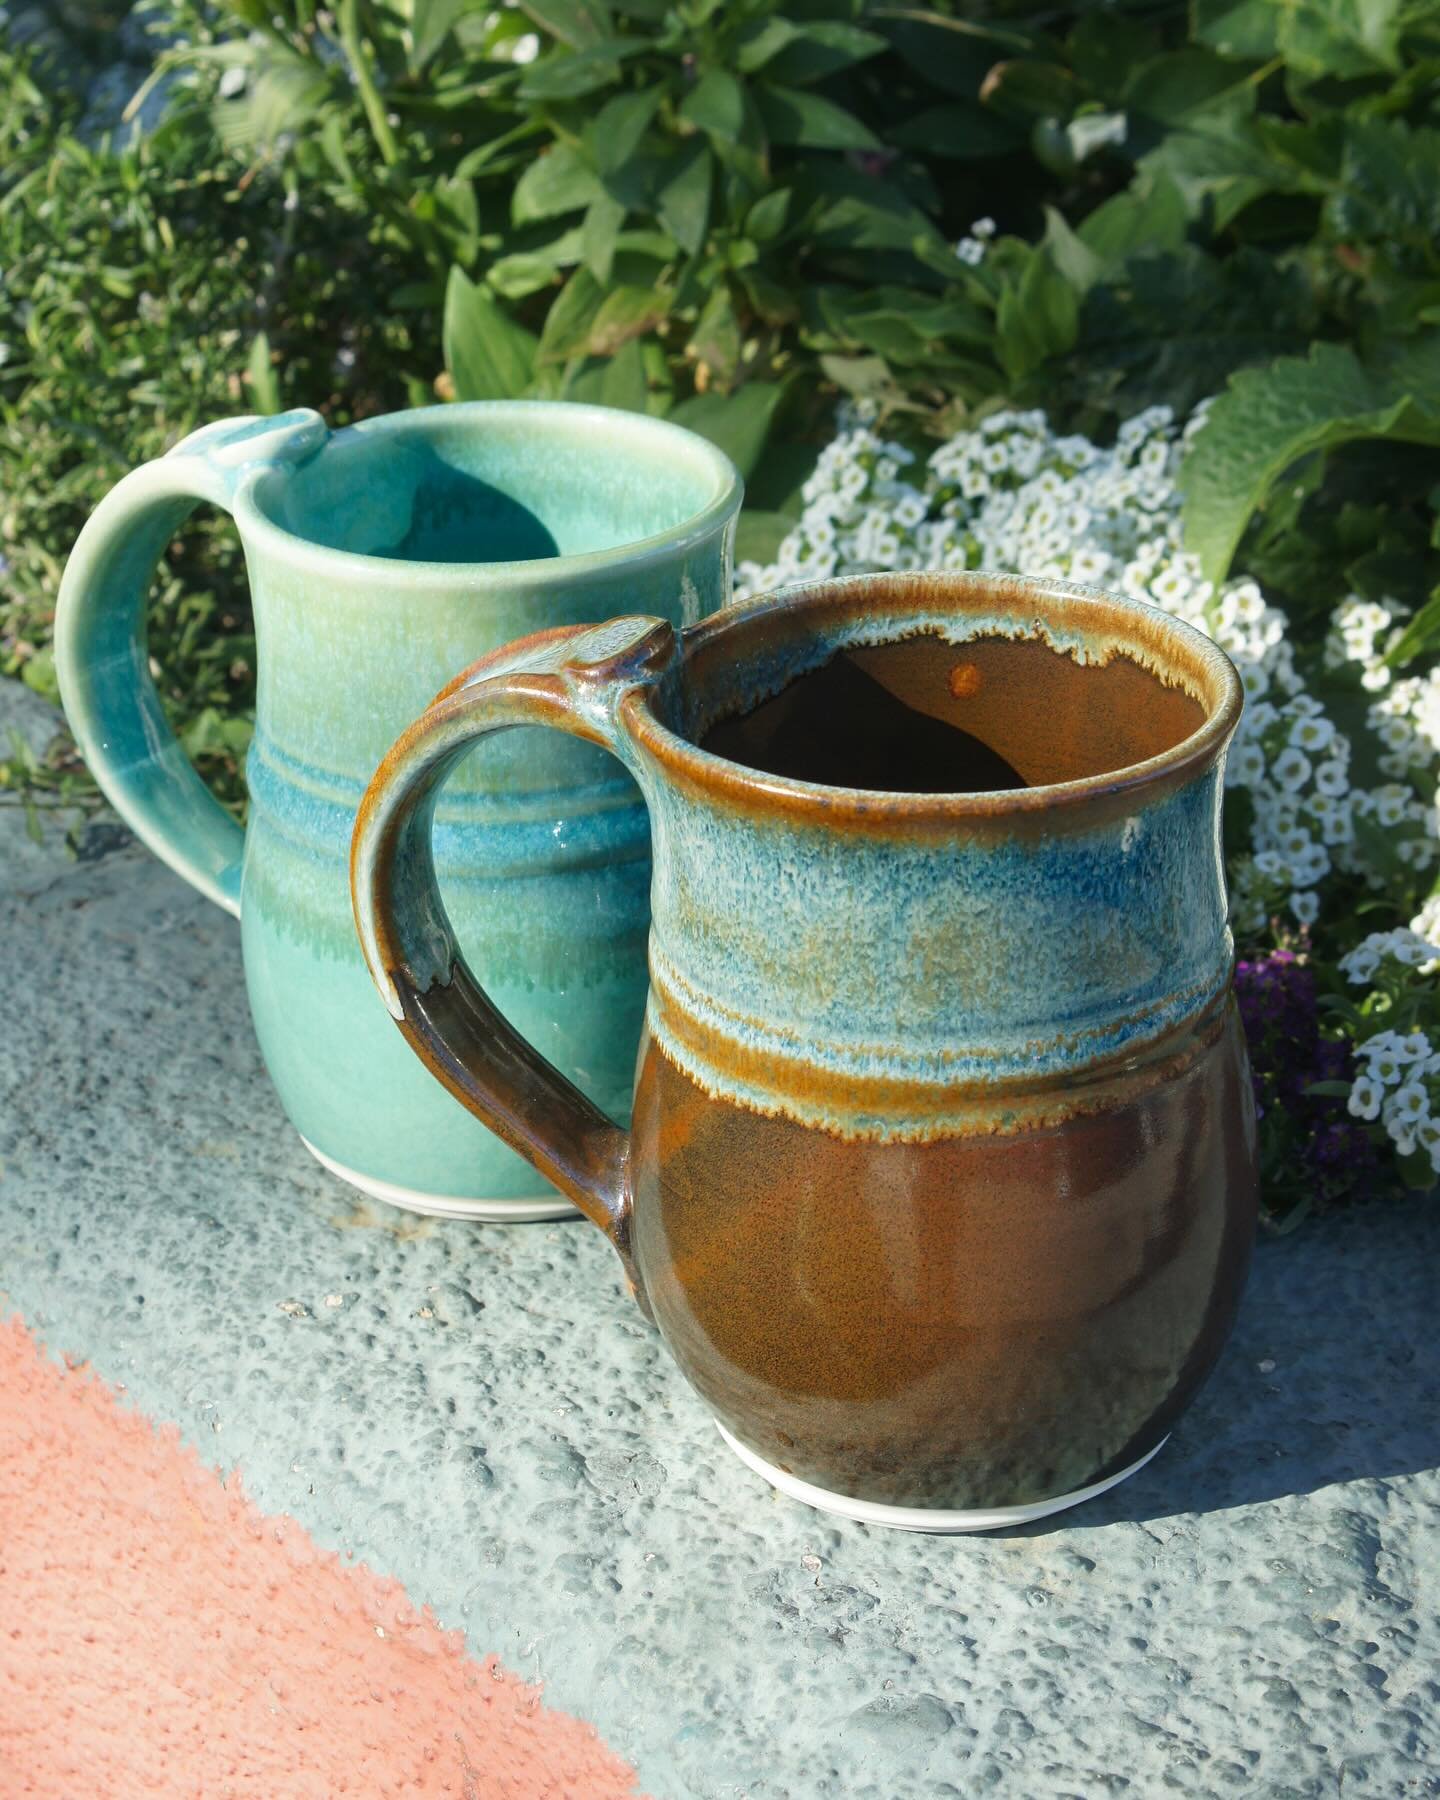 A reminder that Mother&rsquo;s Day is just around the corner! And we have the perfect, one-of-a-kind gifts for the mother figures in your life ☺️💐 

We love these stunning hand thrown mugs by local artist, Kathy Goldberg. Or personalize your gift wi